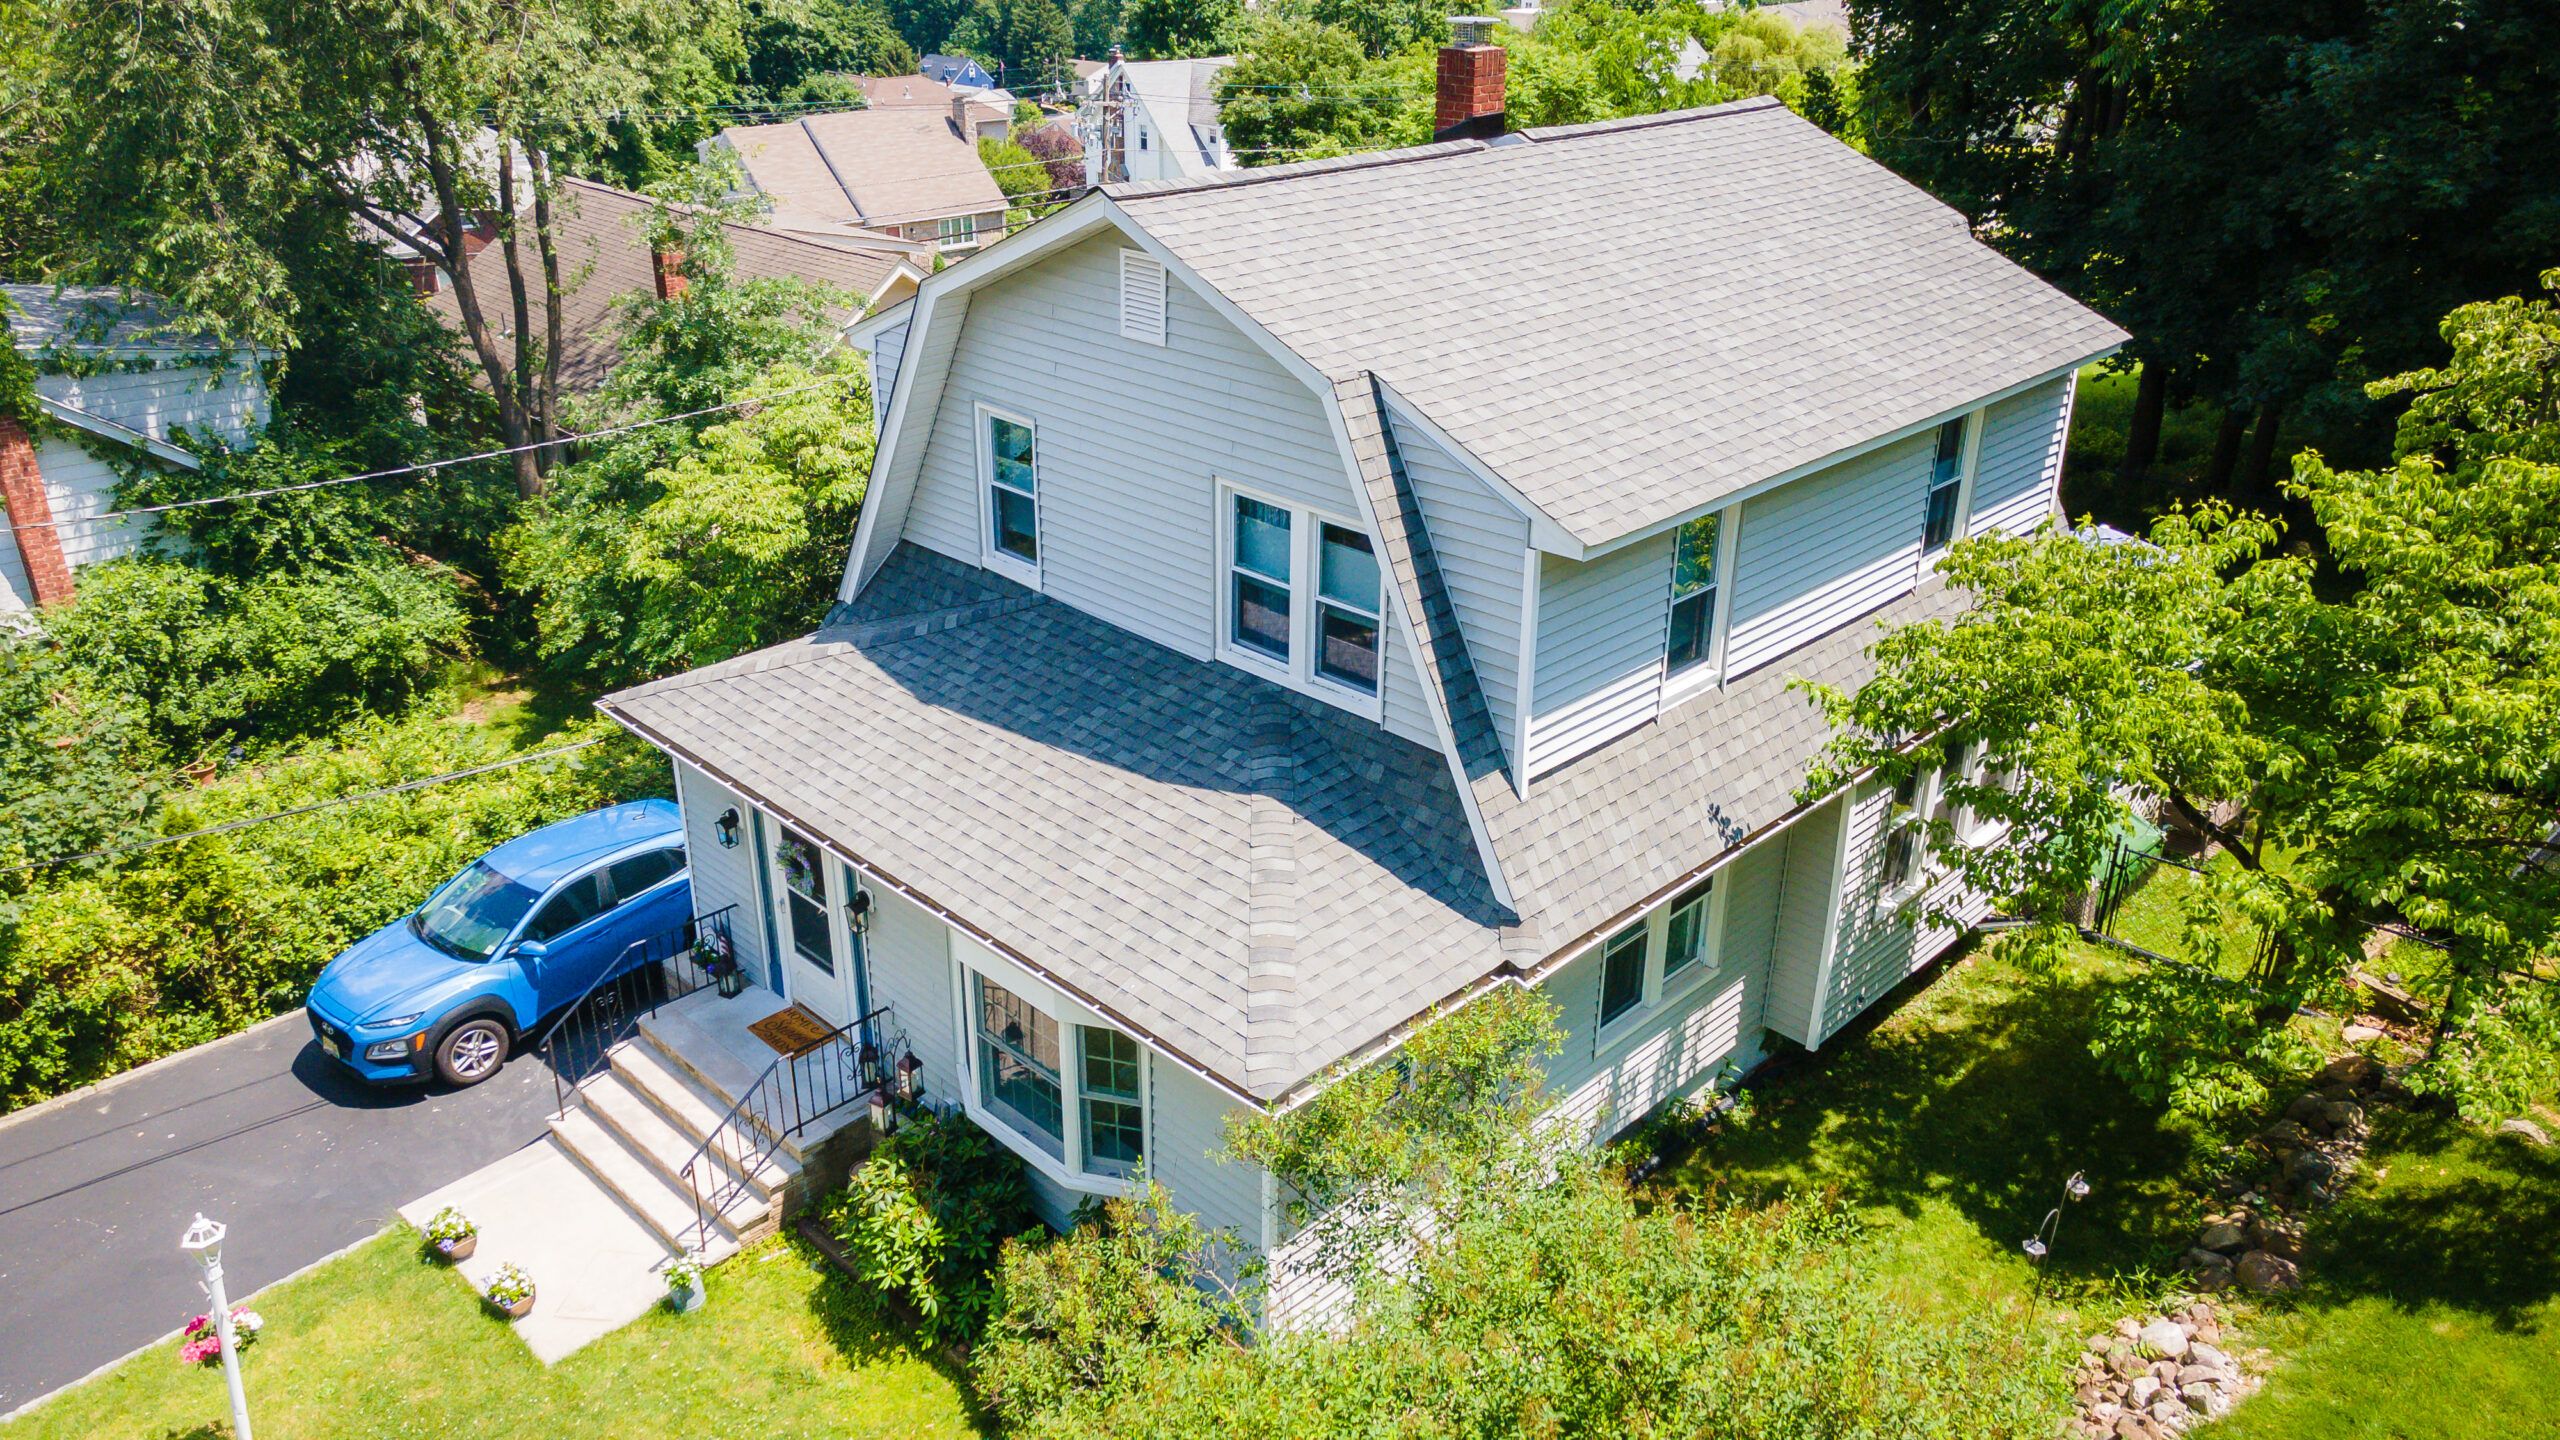 An aerial view of a house with a blue car parked in front of it.